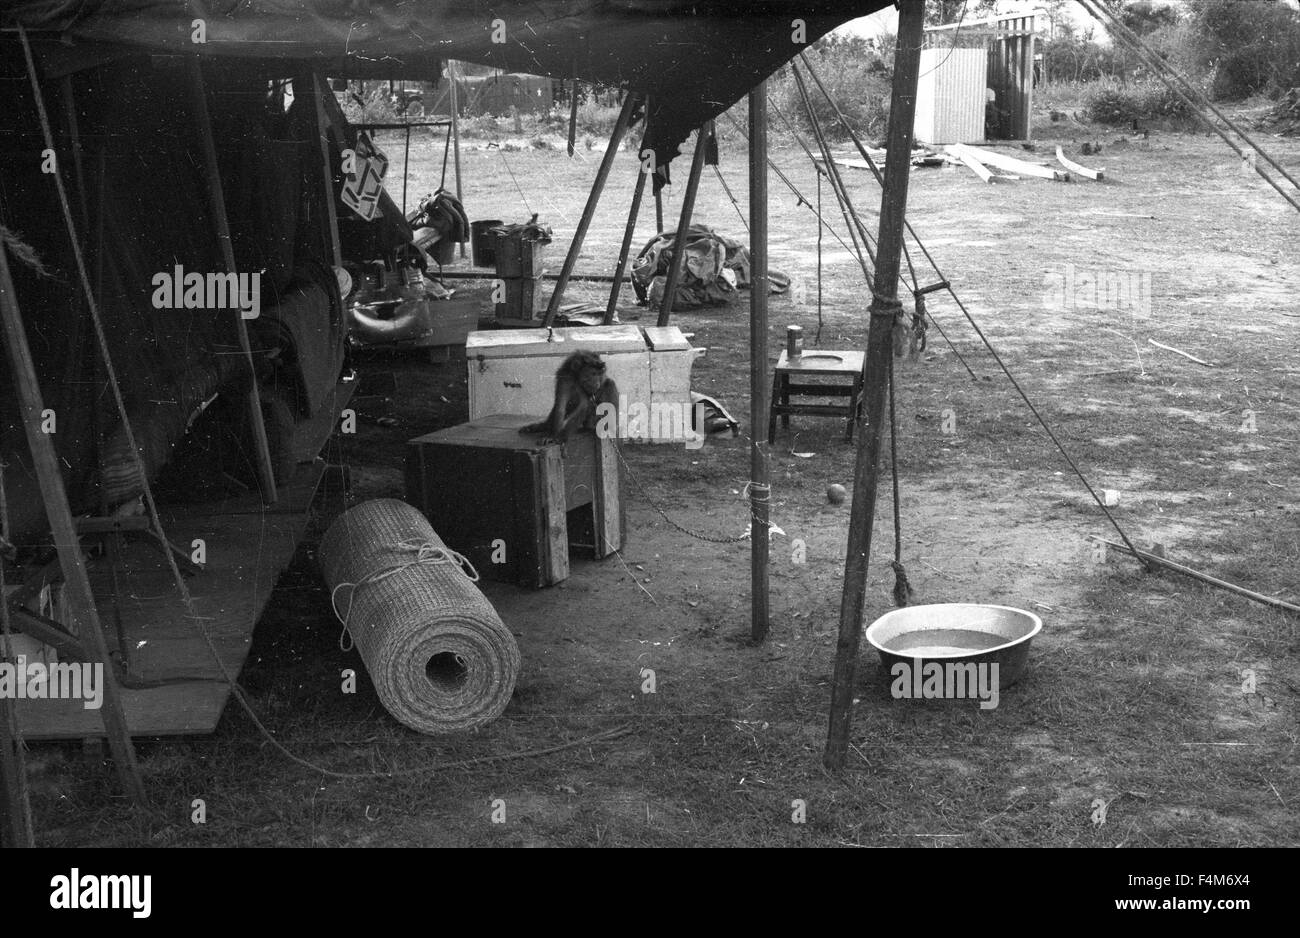 Tents at a First Infantry Division base camp in 1965 during the Vietnam War. Stock Photo